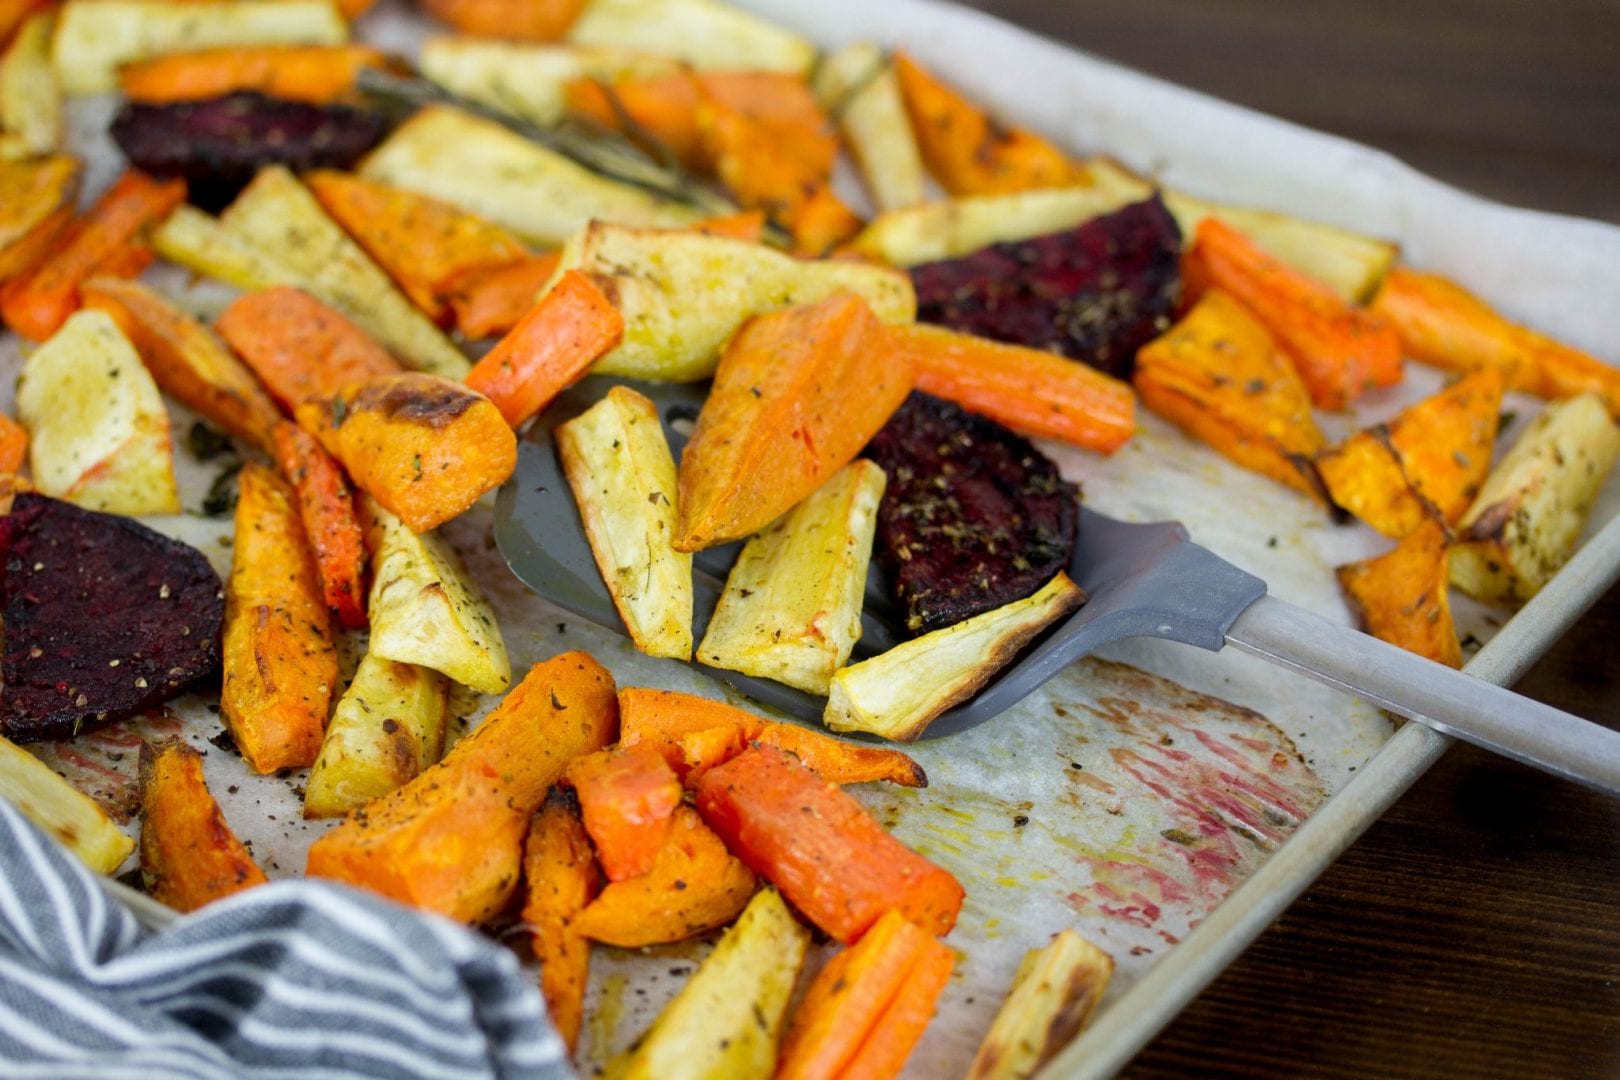 Roast beetroot and root vegetables with fresh herbs - perfect for Sunday family lunch